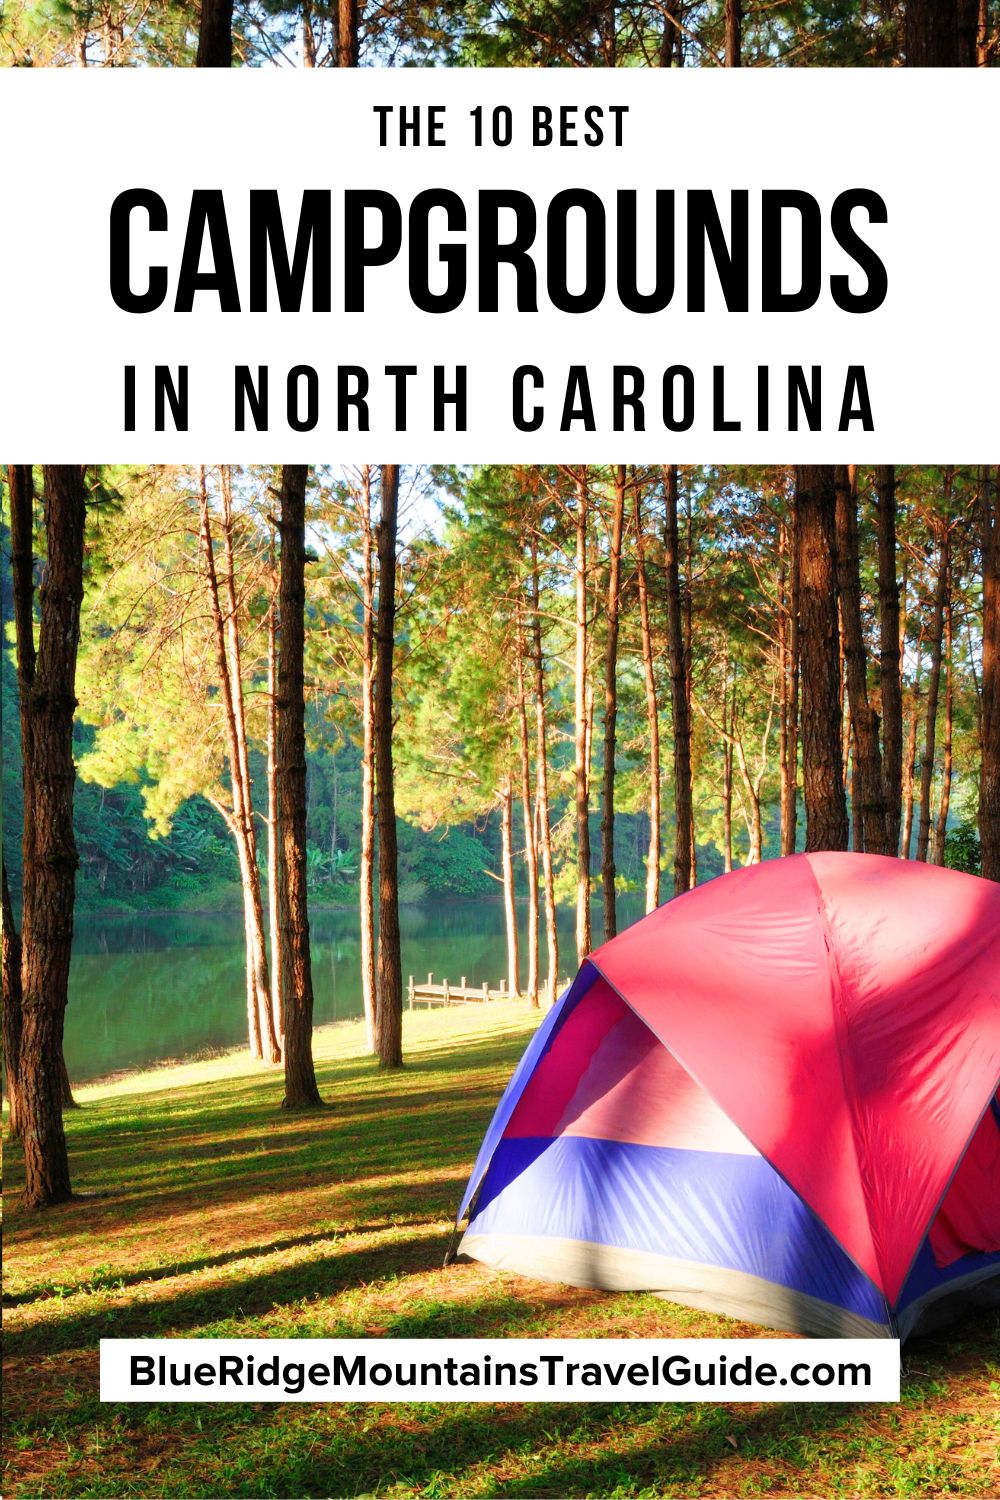 The 15 Best Campgrounds in North Carolina with campgrounds near Outer Banks, Winston Salem, Charlotte, Asheville GSNP and more! | campgrounds in north carolina on the beach | beachfront campgrounds in north carolina | nc campgrounds | north carolina campgrounds | camping in north carolina | camping in nc | north carolina camping | nc camping | oceanfront campgrounds in north carolina | north carolina camping sites | north carolina state campgrounds | campgrounds in north carolina with cabins |